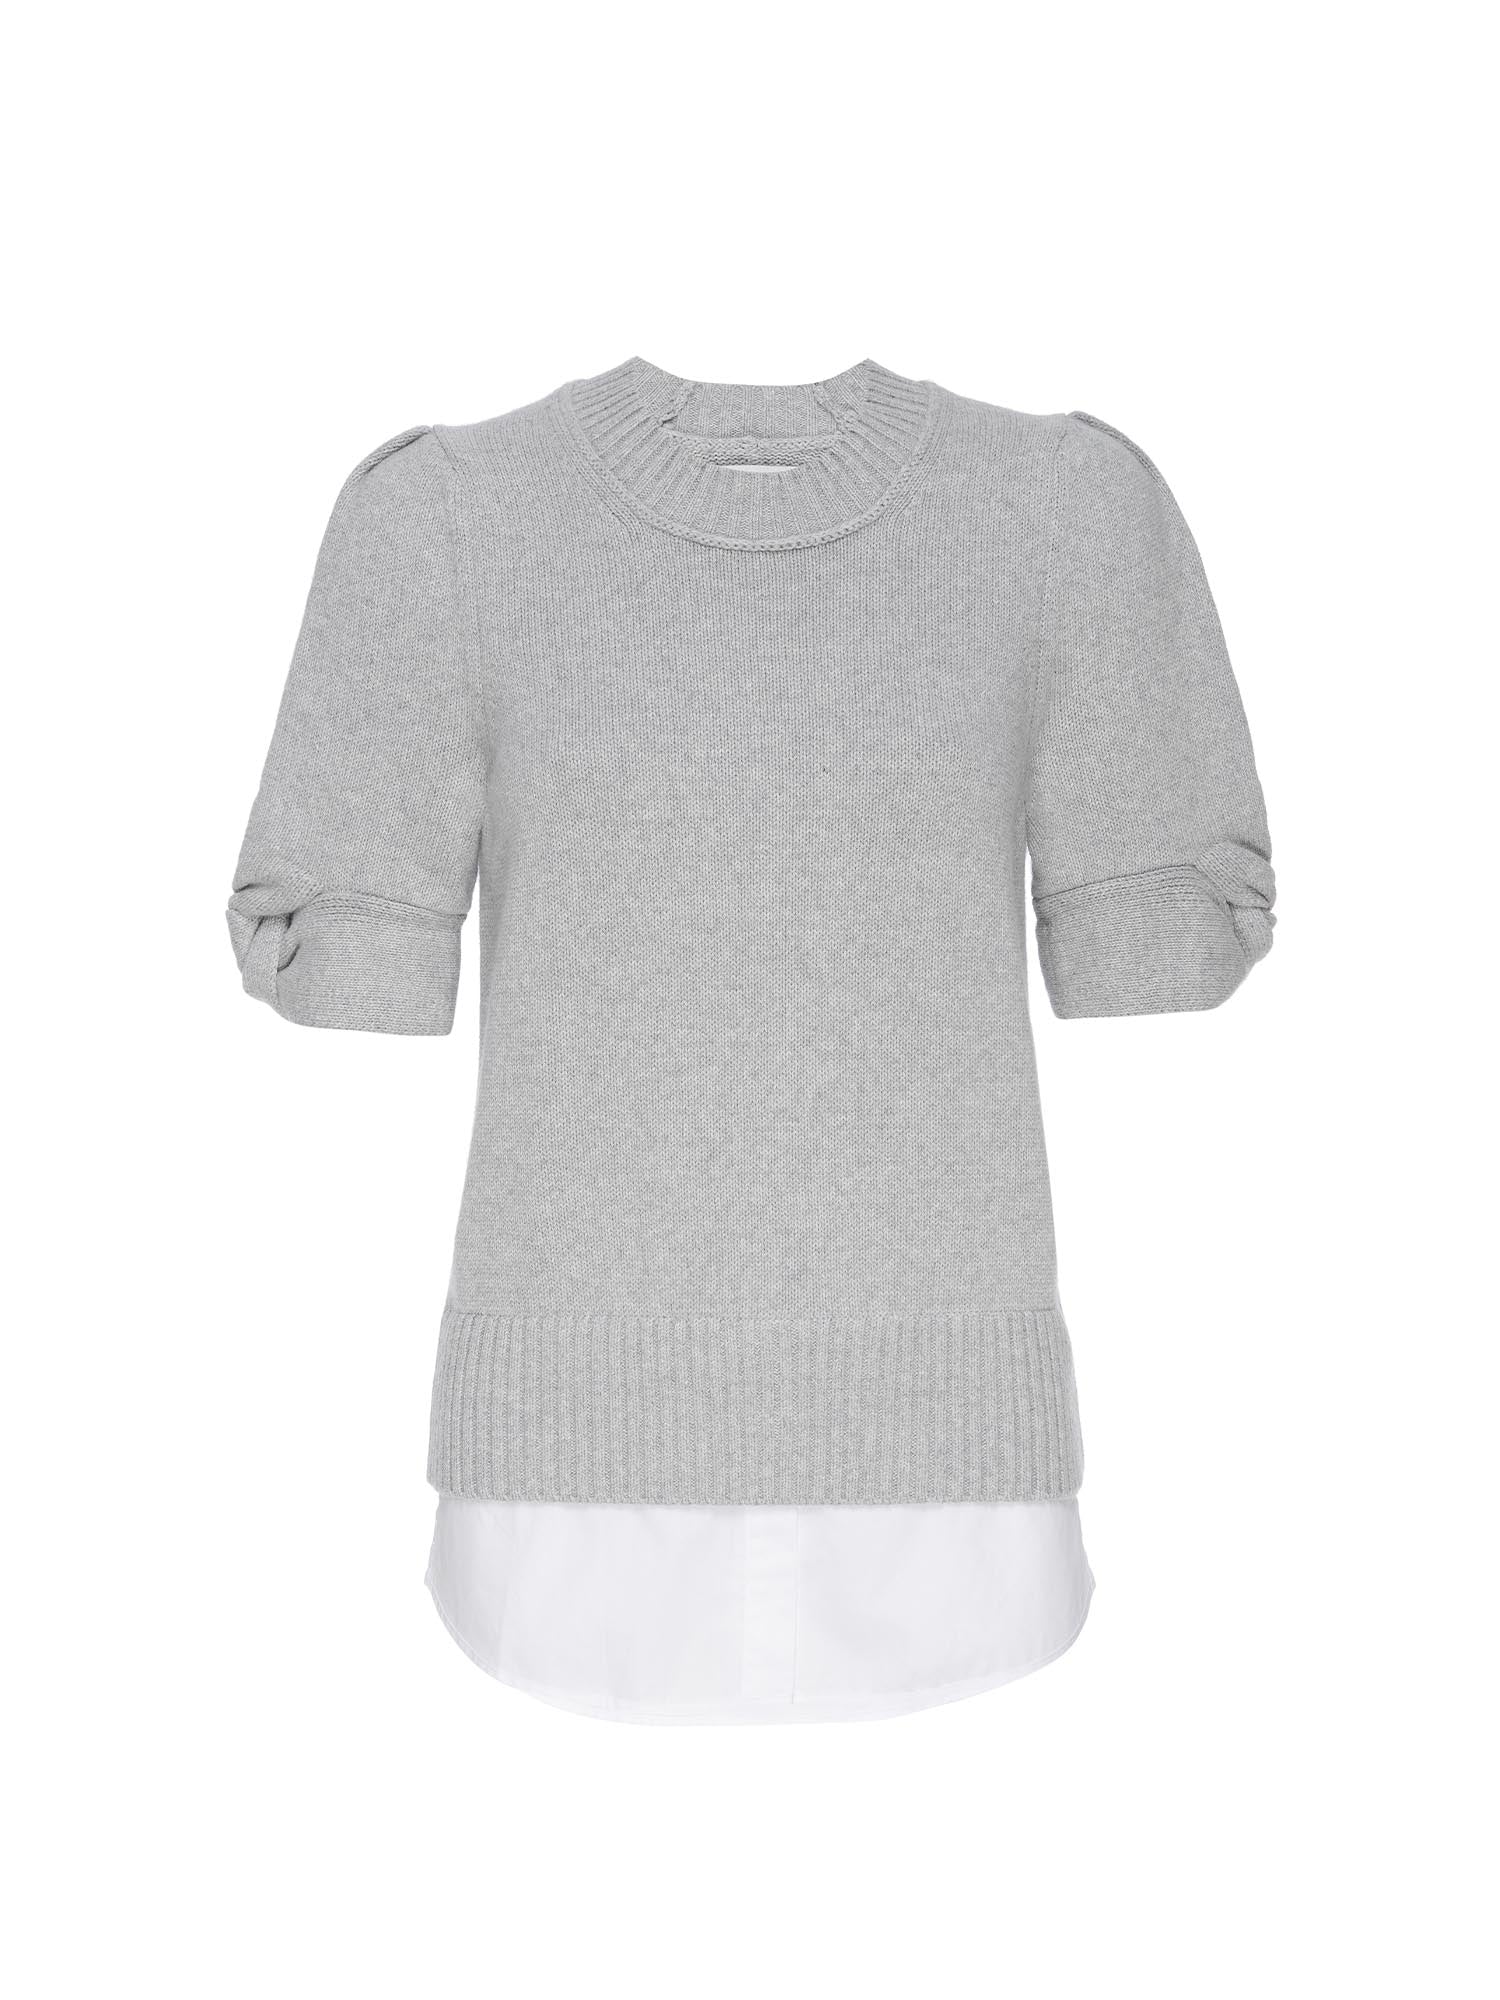 Emme layered knot sleeve crewneck grey sweater flat view